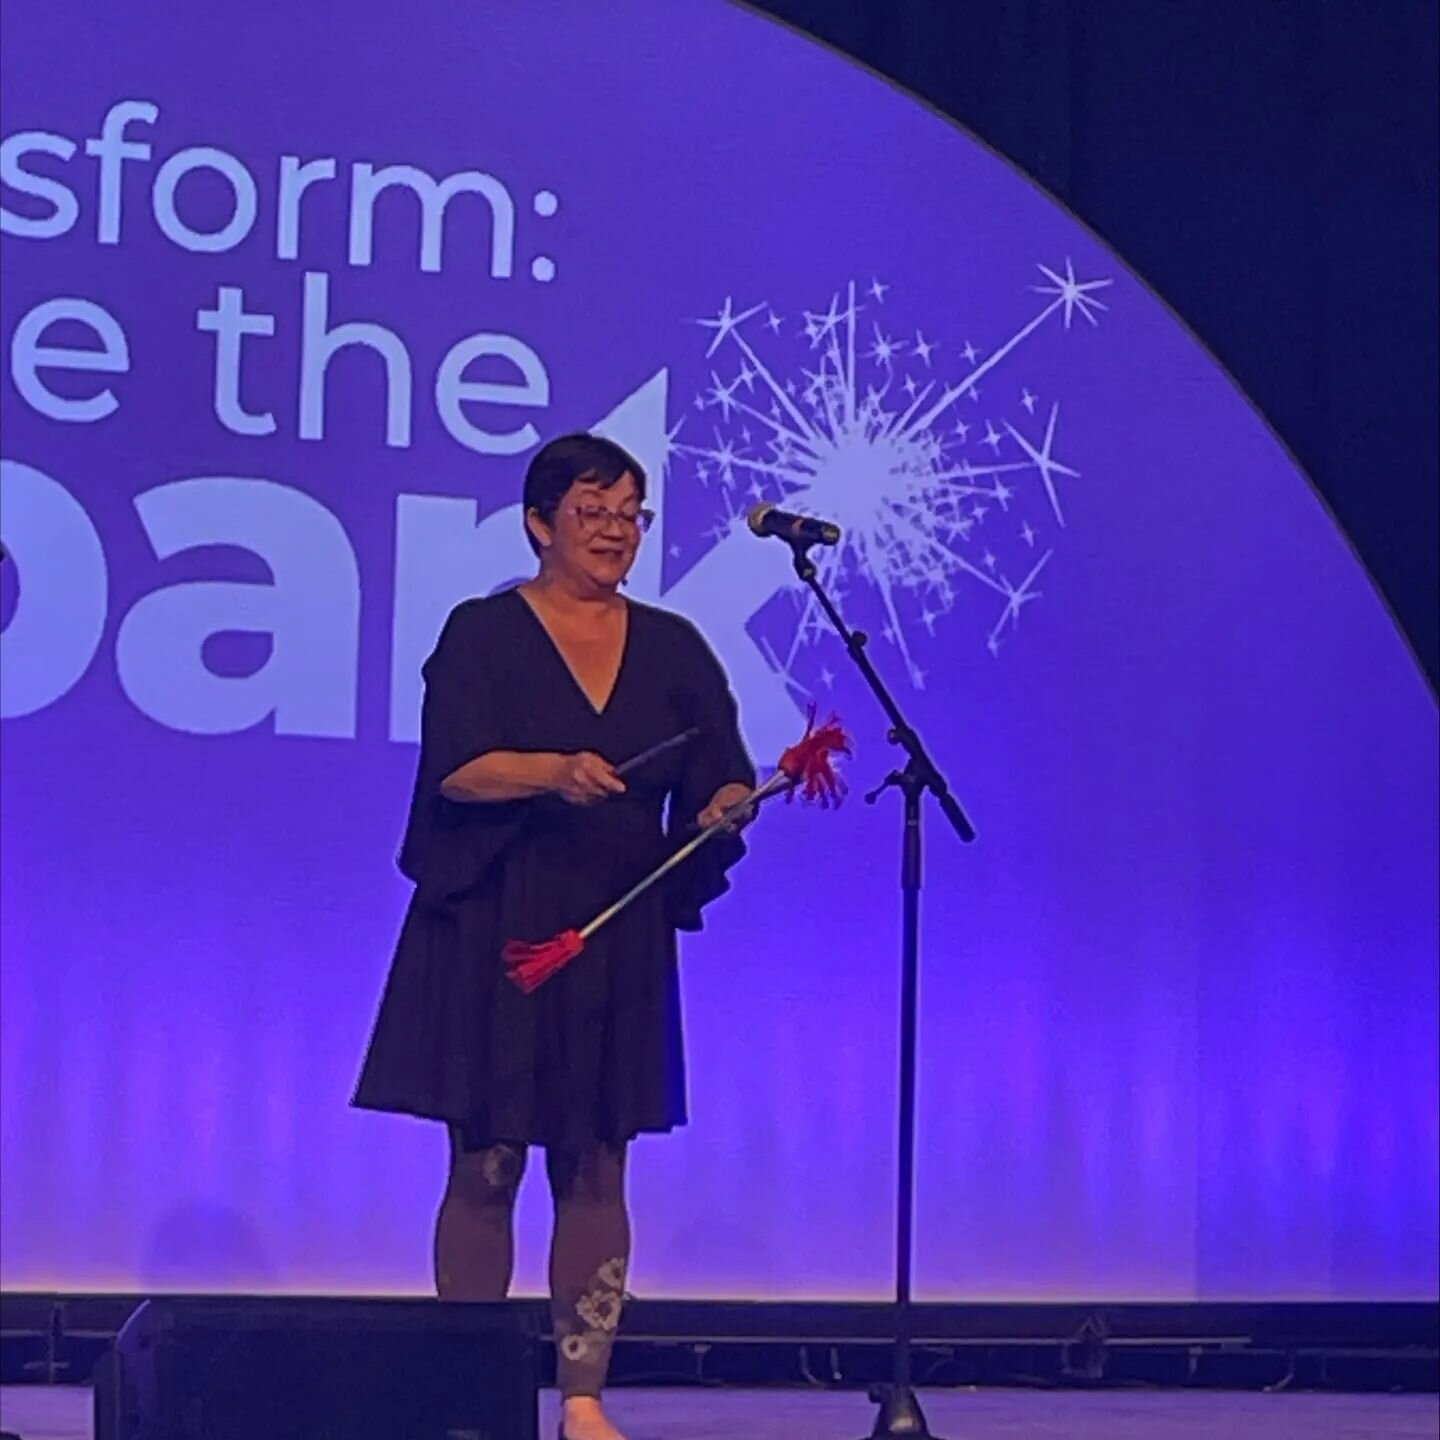 Today, our Executive Director Yarrow Brown was &quot;Flipping the script on housing&quot; at the Building Michigan Communities Conference. Our very own Yarrow Brown showcased her talents and tossed some Devil Sticks while pitching our Housing Ready P